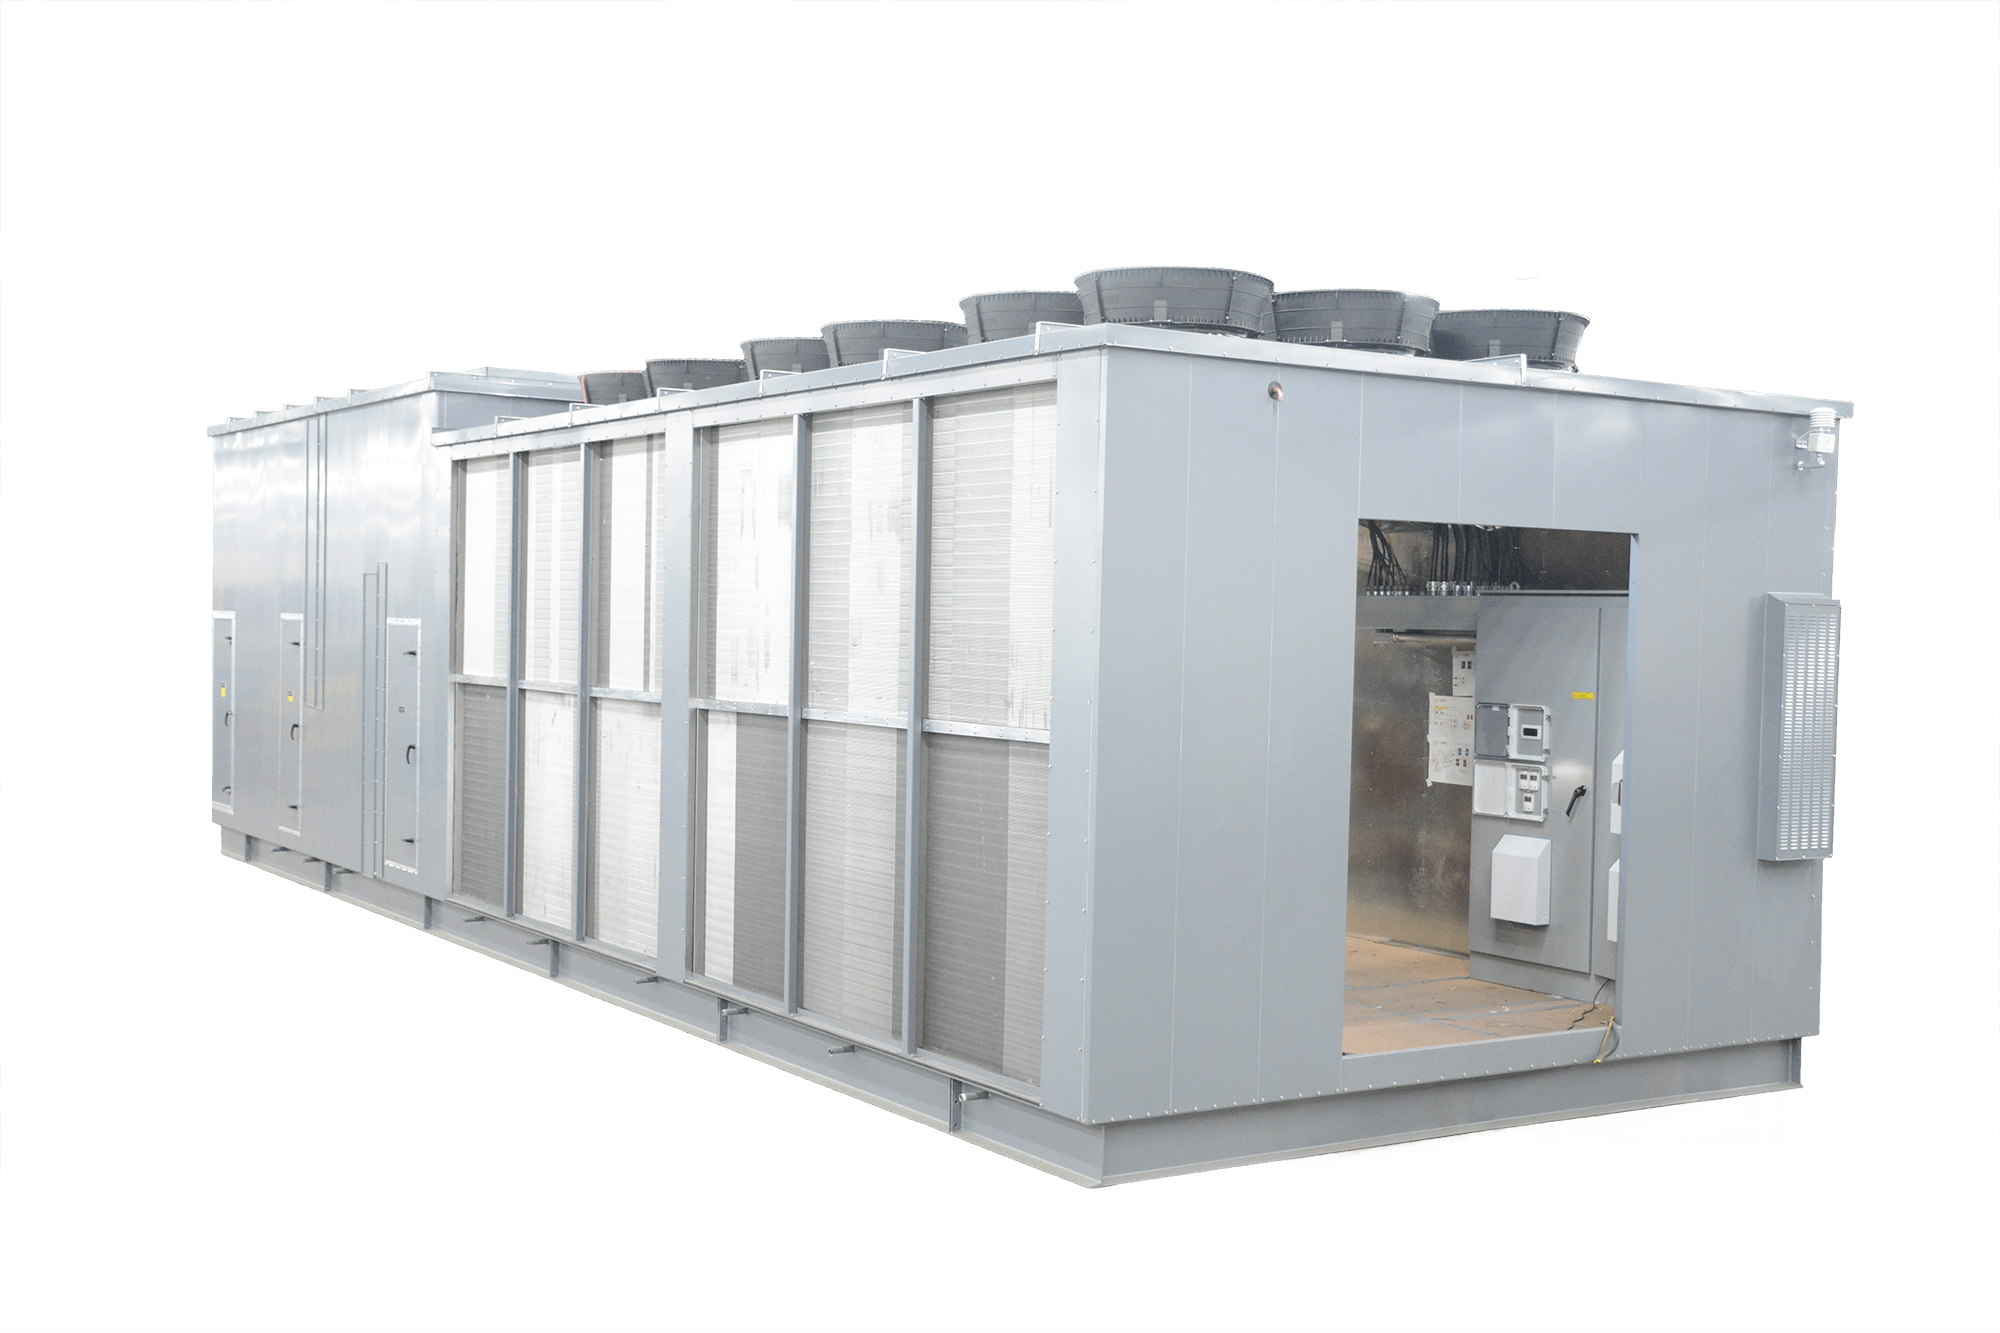 Unitary Data Center Cooling Systems